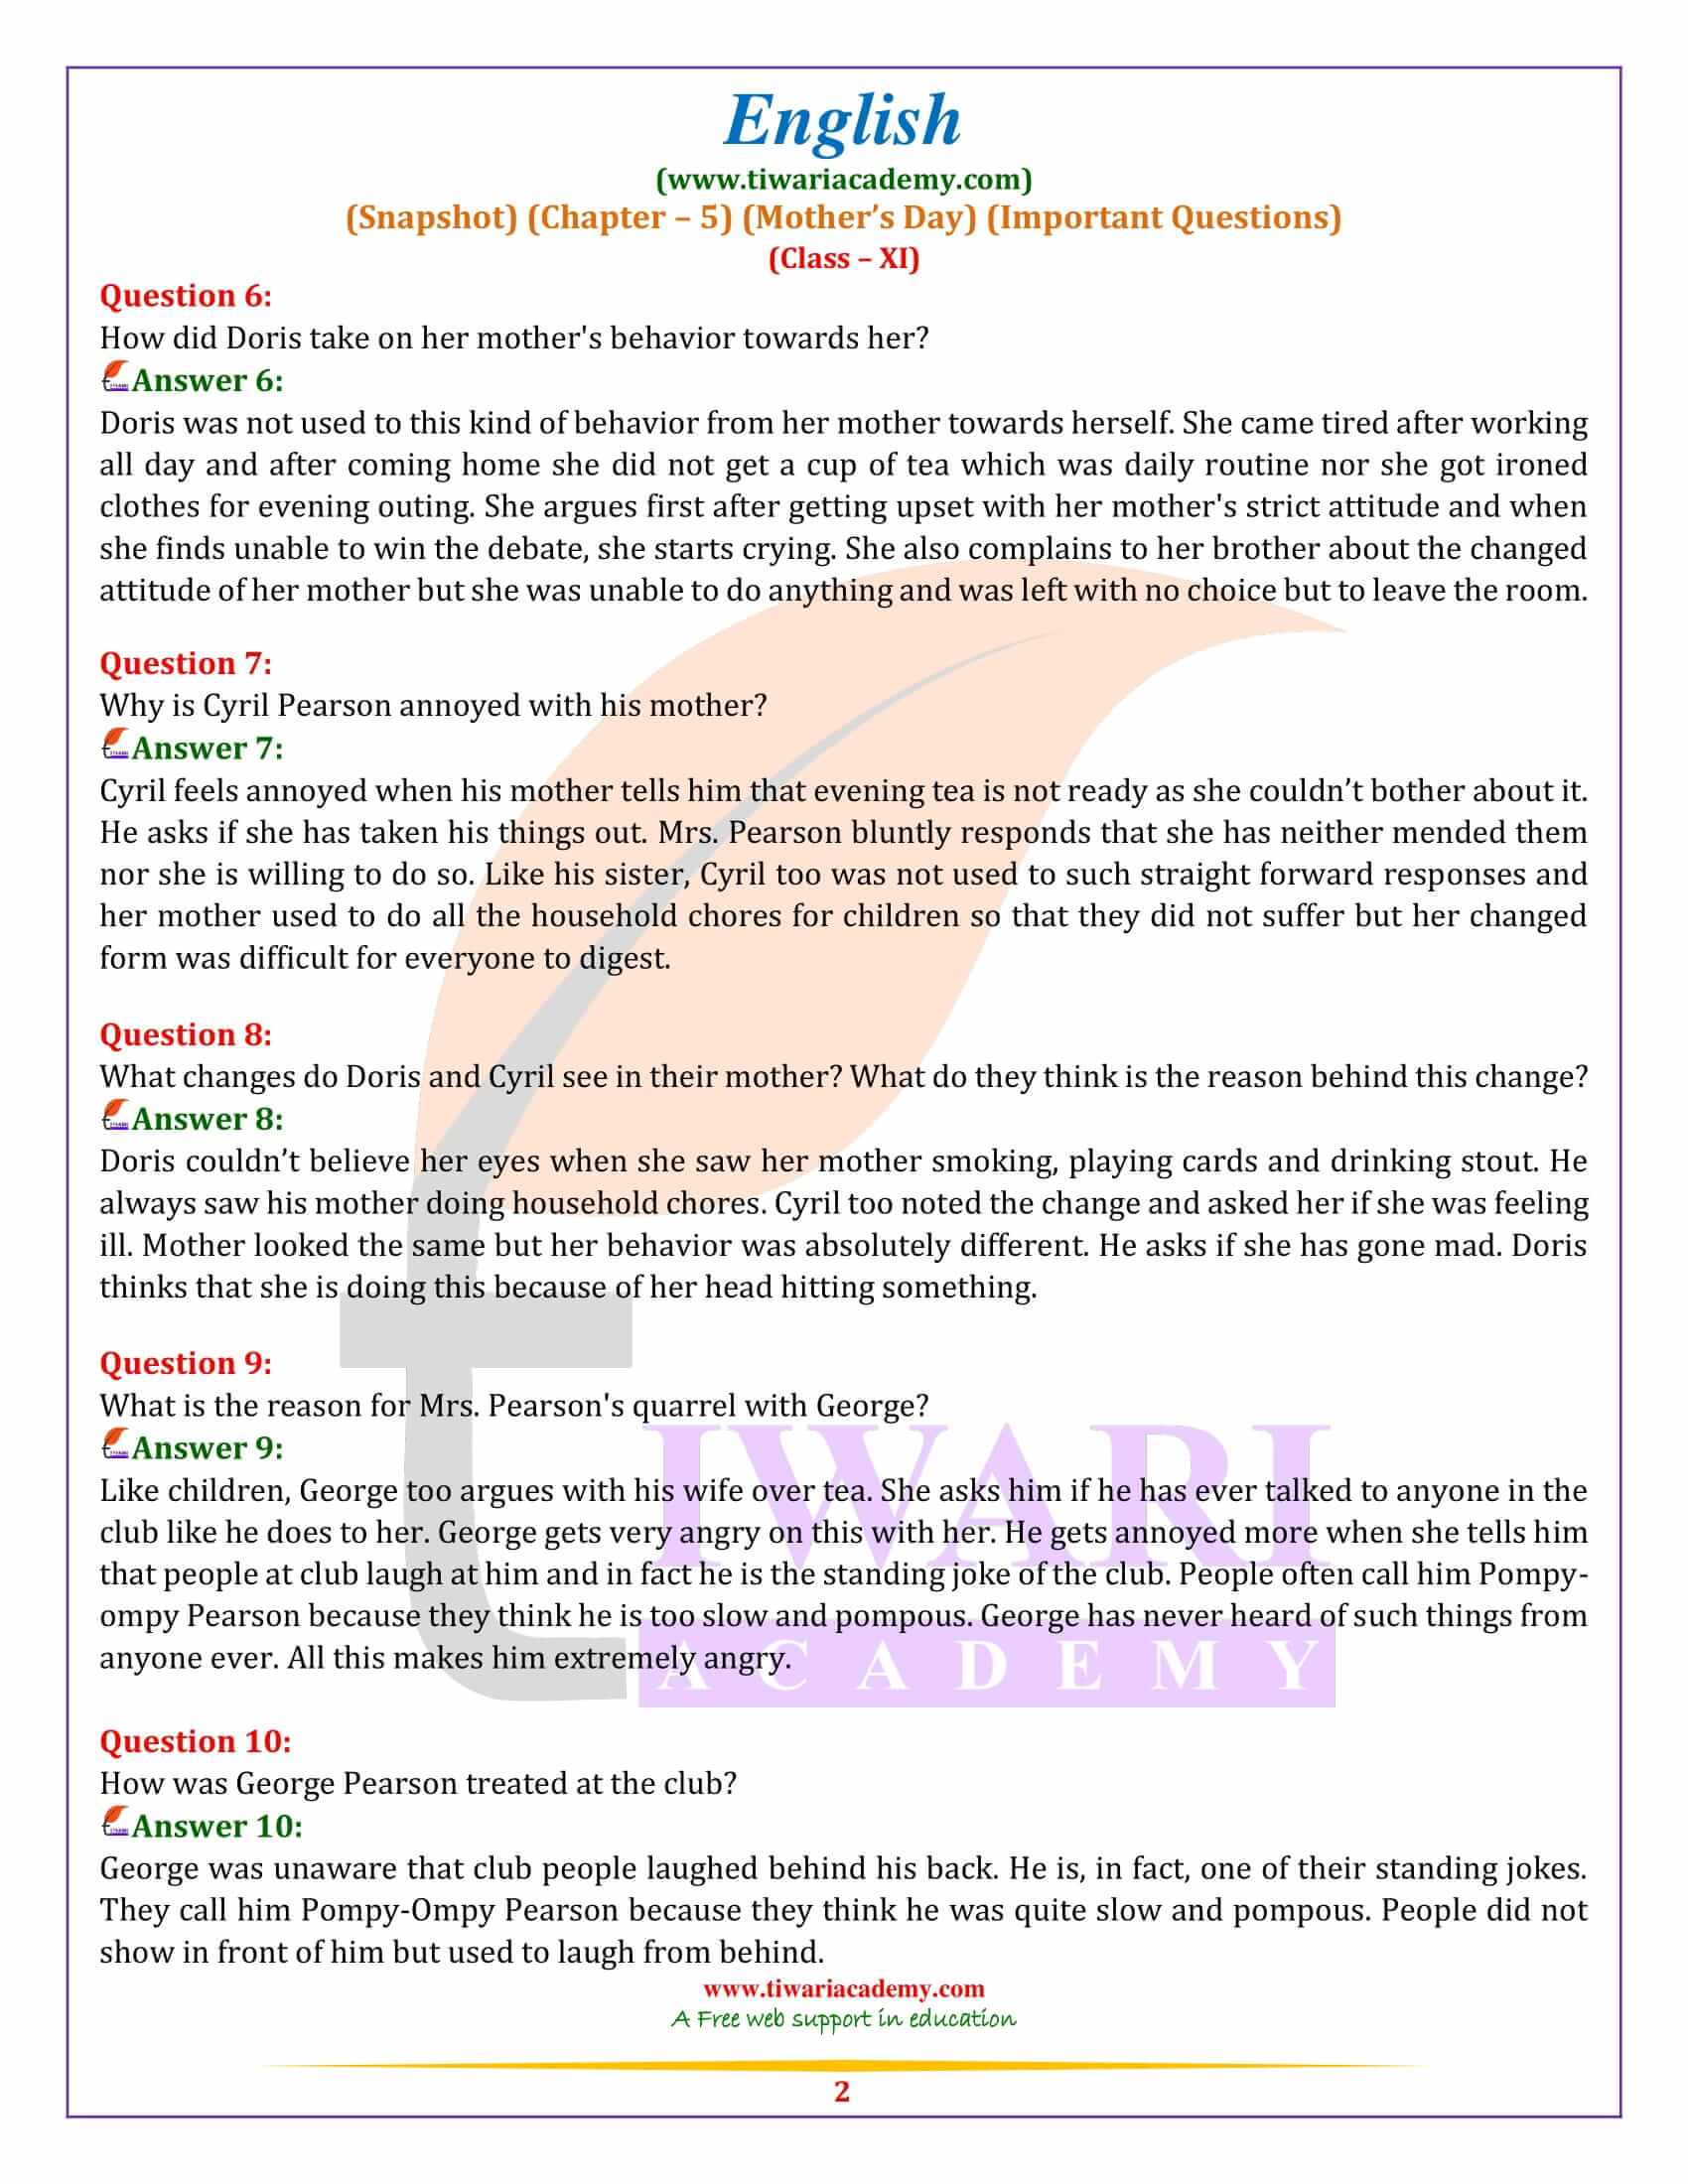 Class 11 English Snapshots Chapter 5 Revision Questions